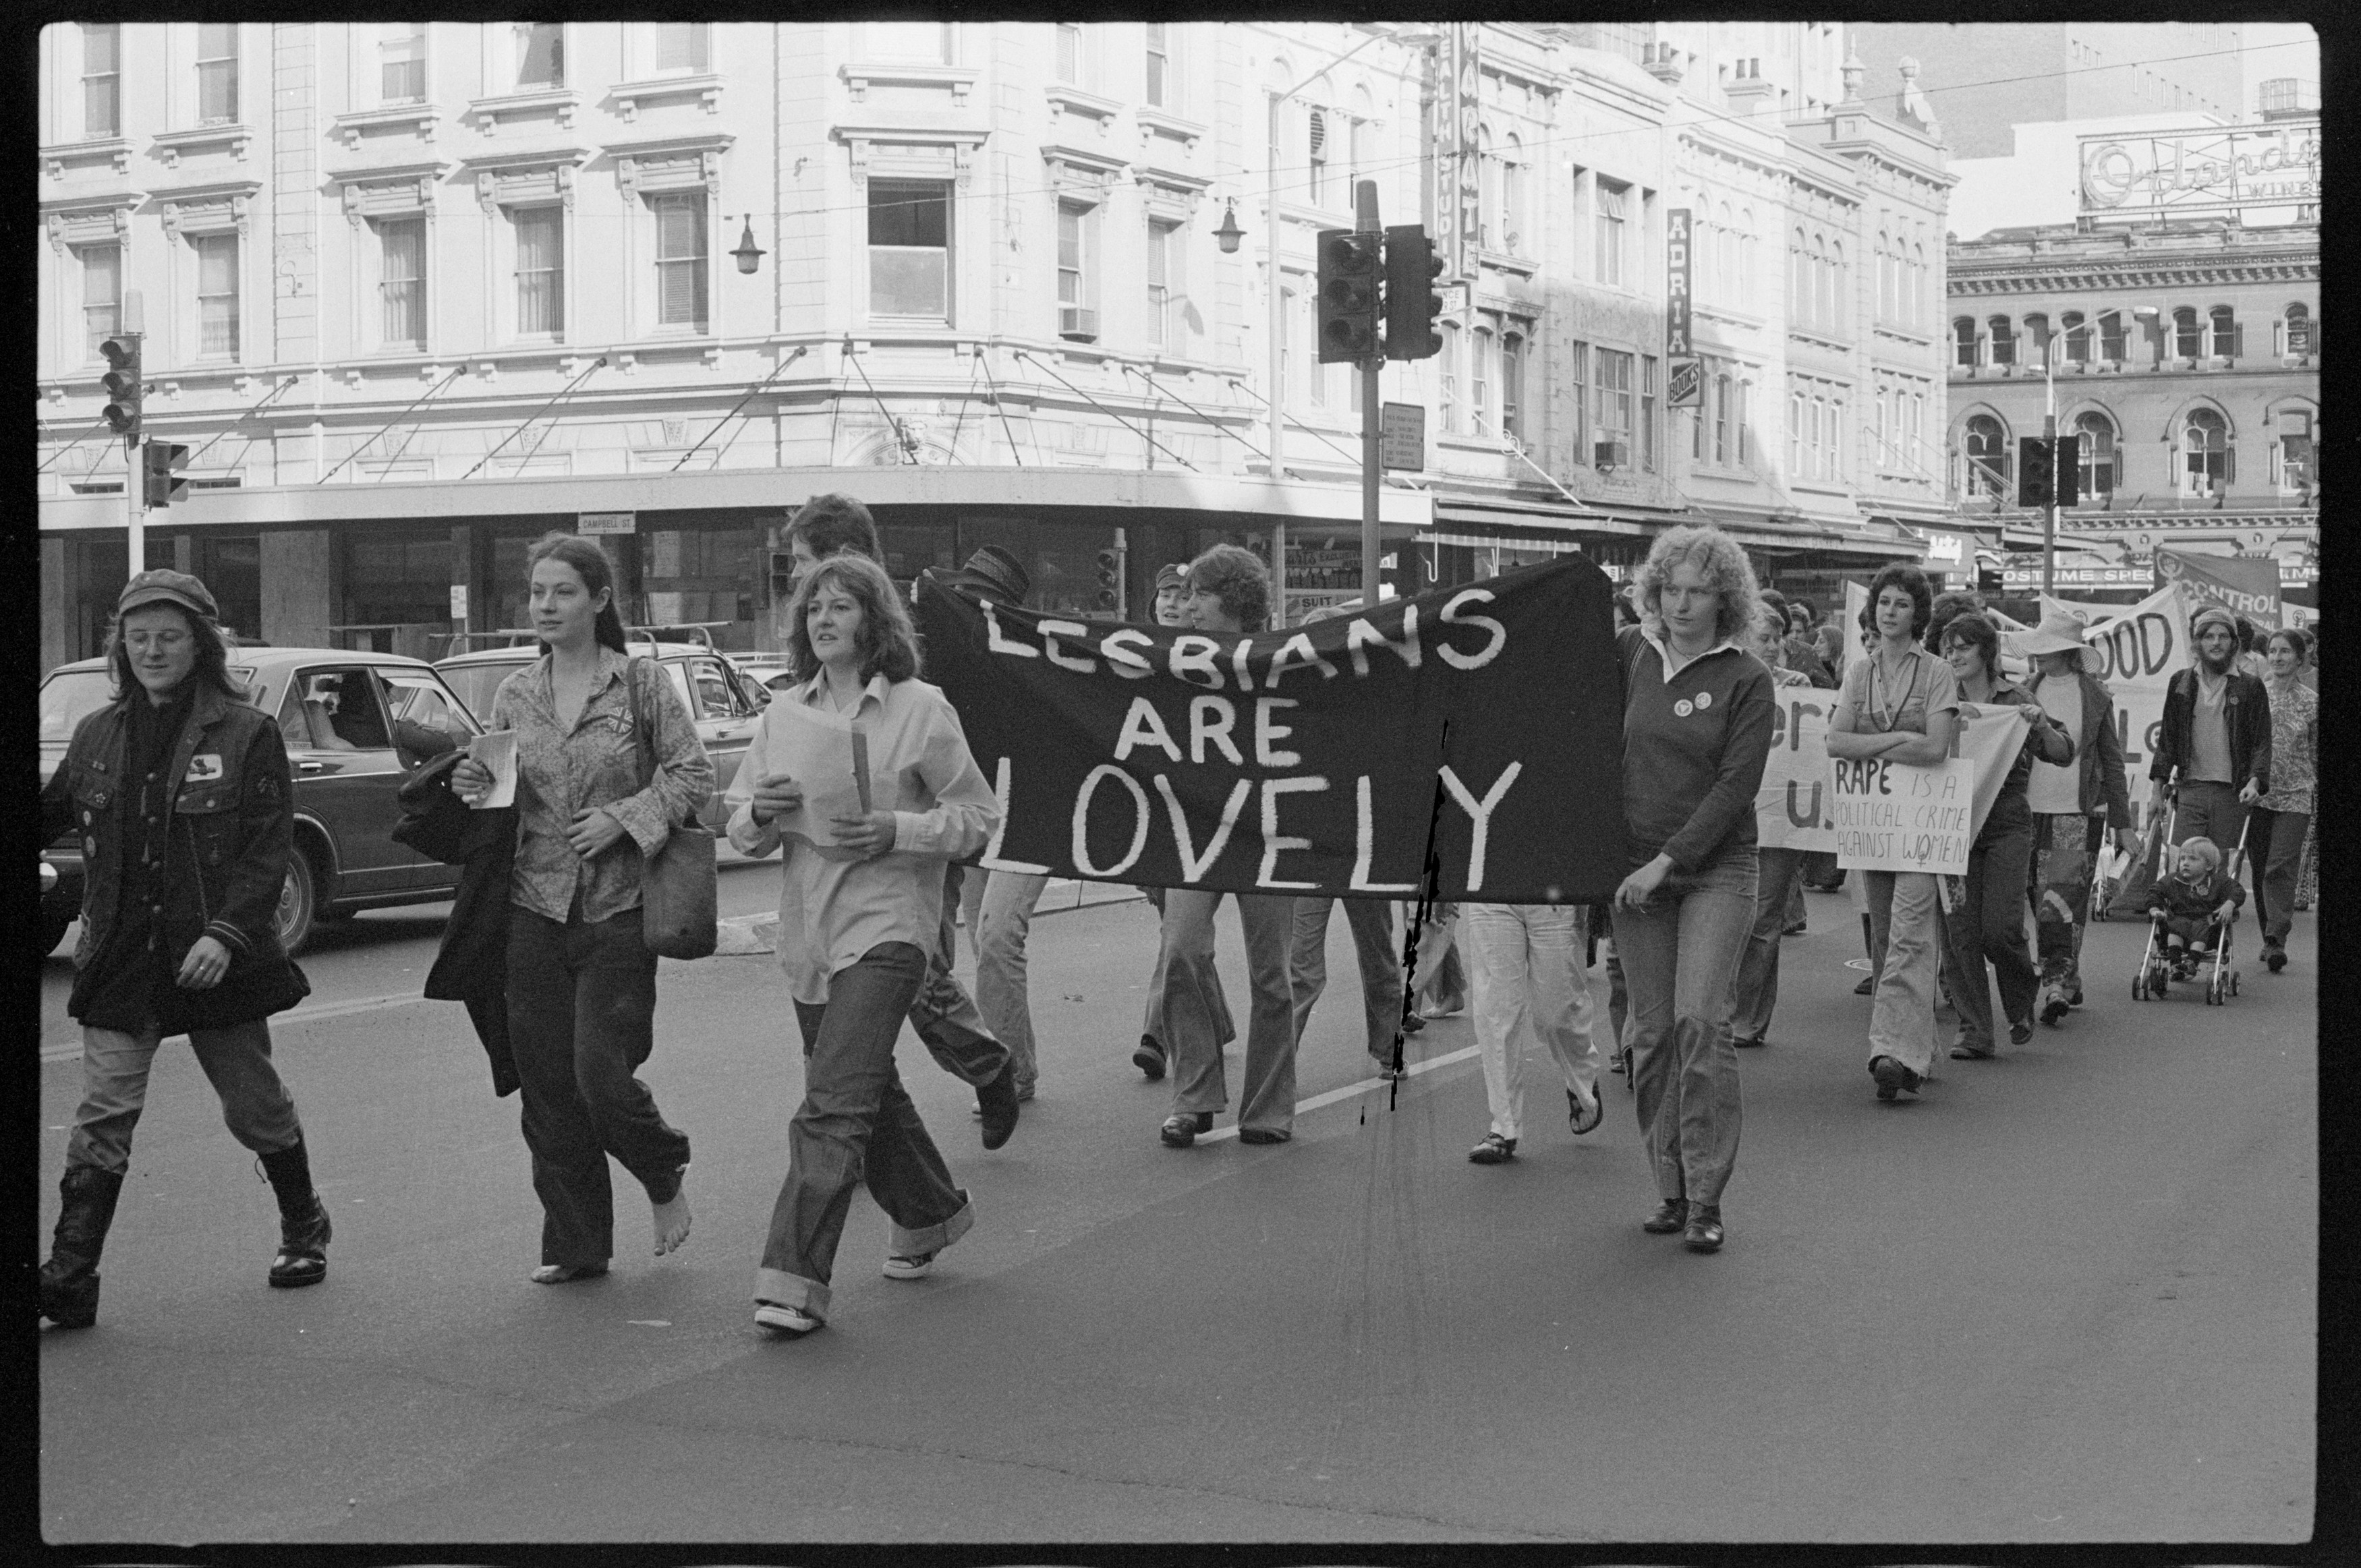 Gay rights supporters carrying 'Lesbians are Lovely' banner, May Day march, Park St at Hyde Park, Sydney. Tribune Collection